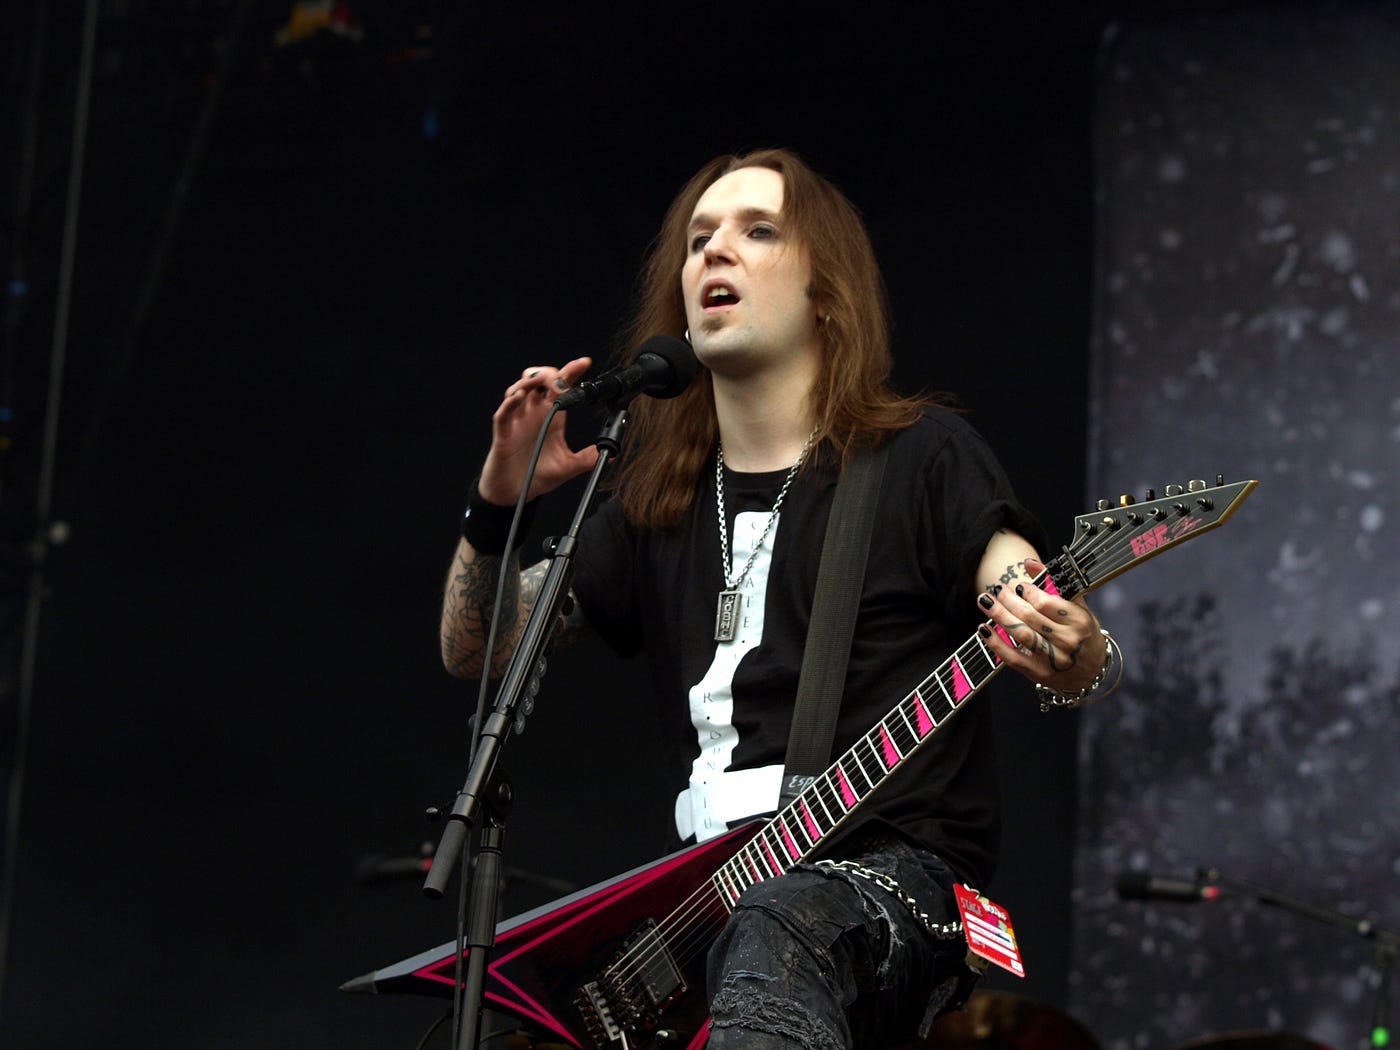 Children of Bodom Founder Alexi Laiho Dies Aged 41 | by Benjamin Hobson |  Up to Eleven | Medium